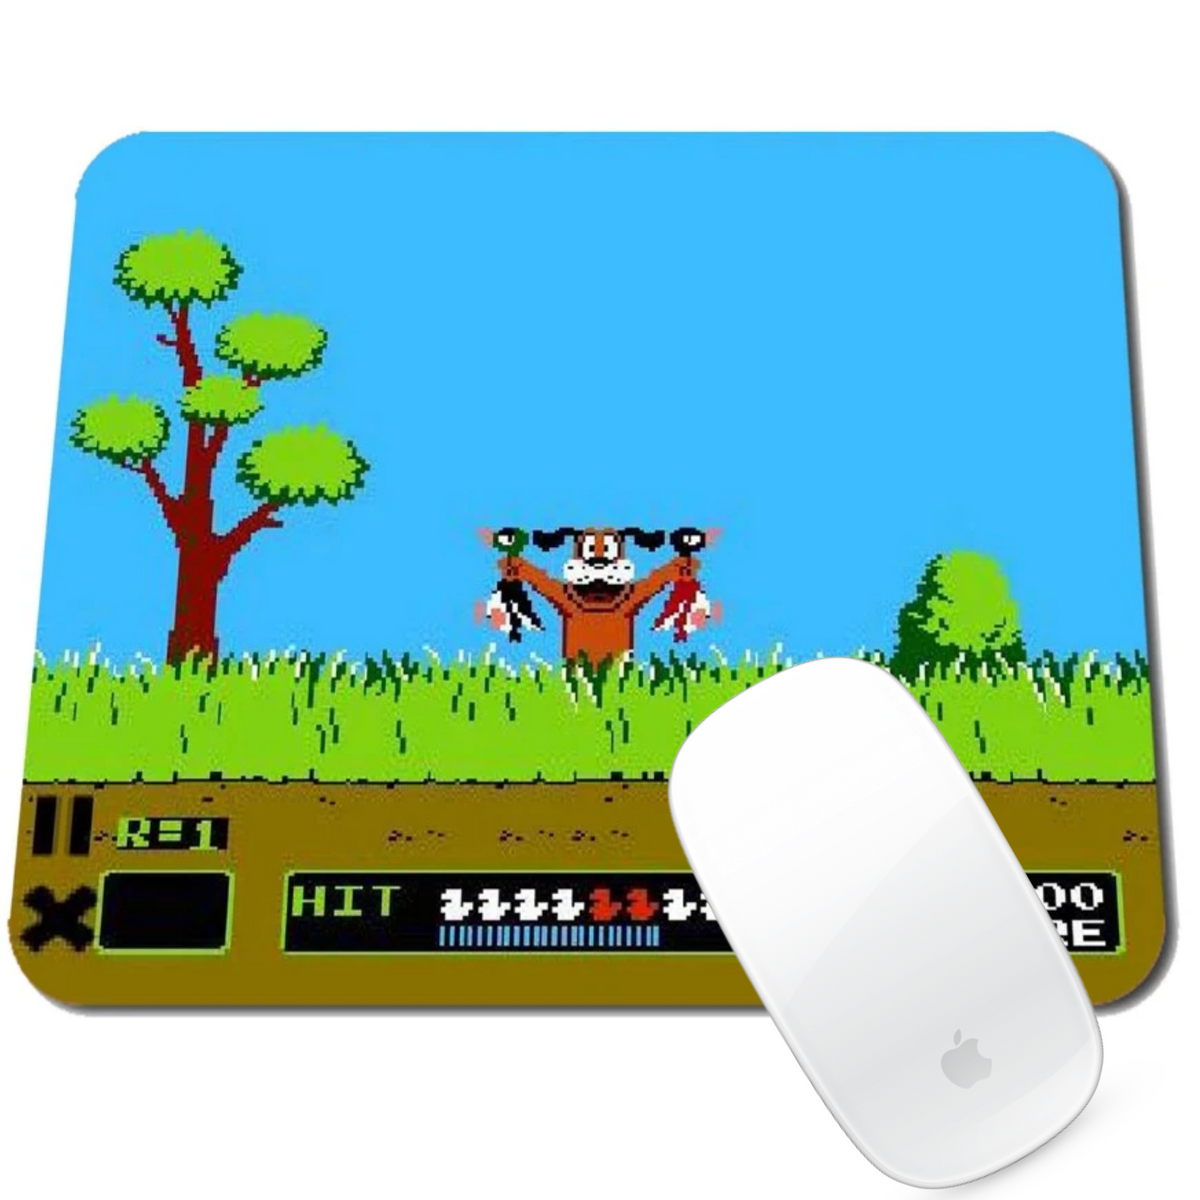 MOUSE PAD-DUCK HUNT